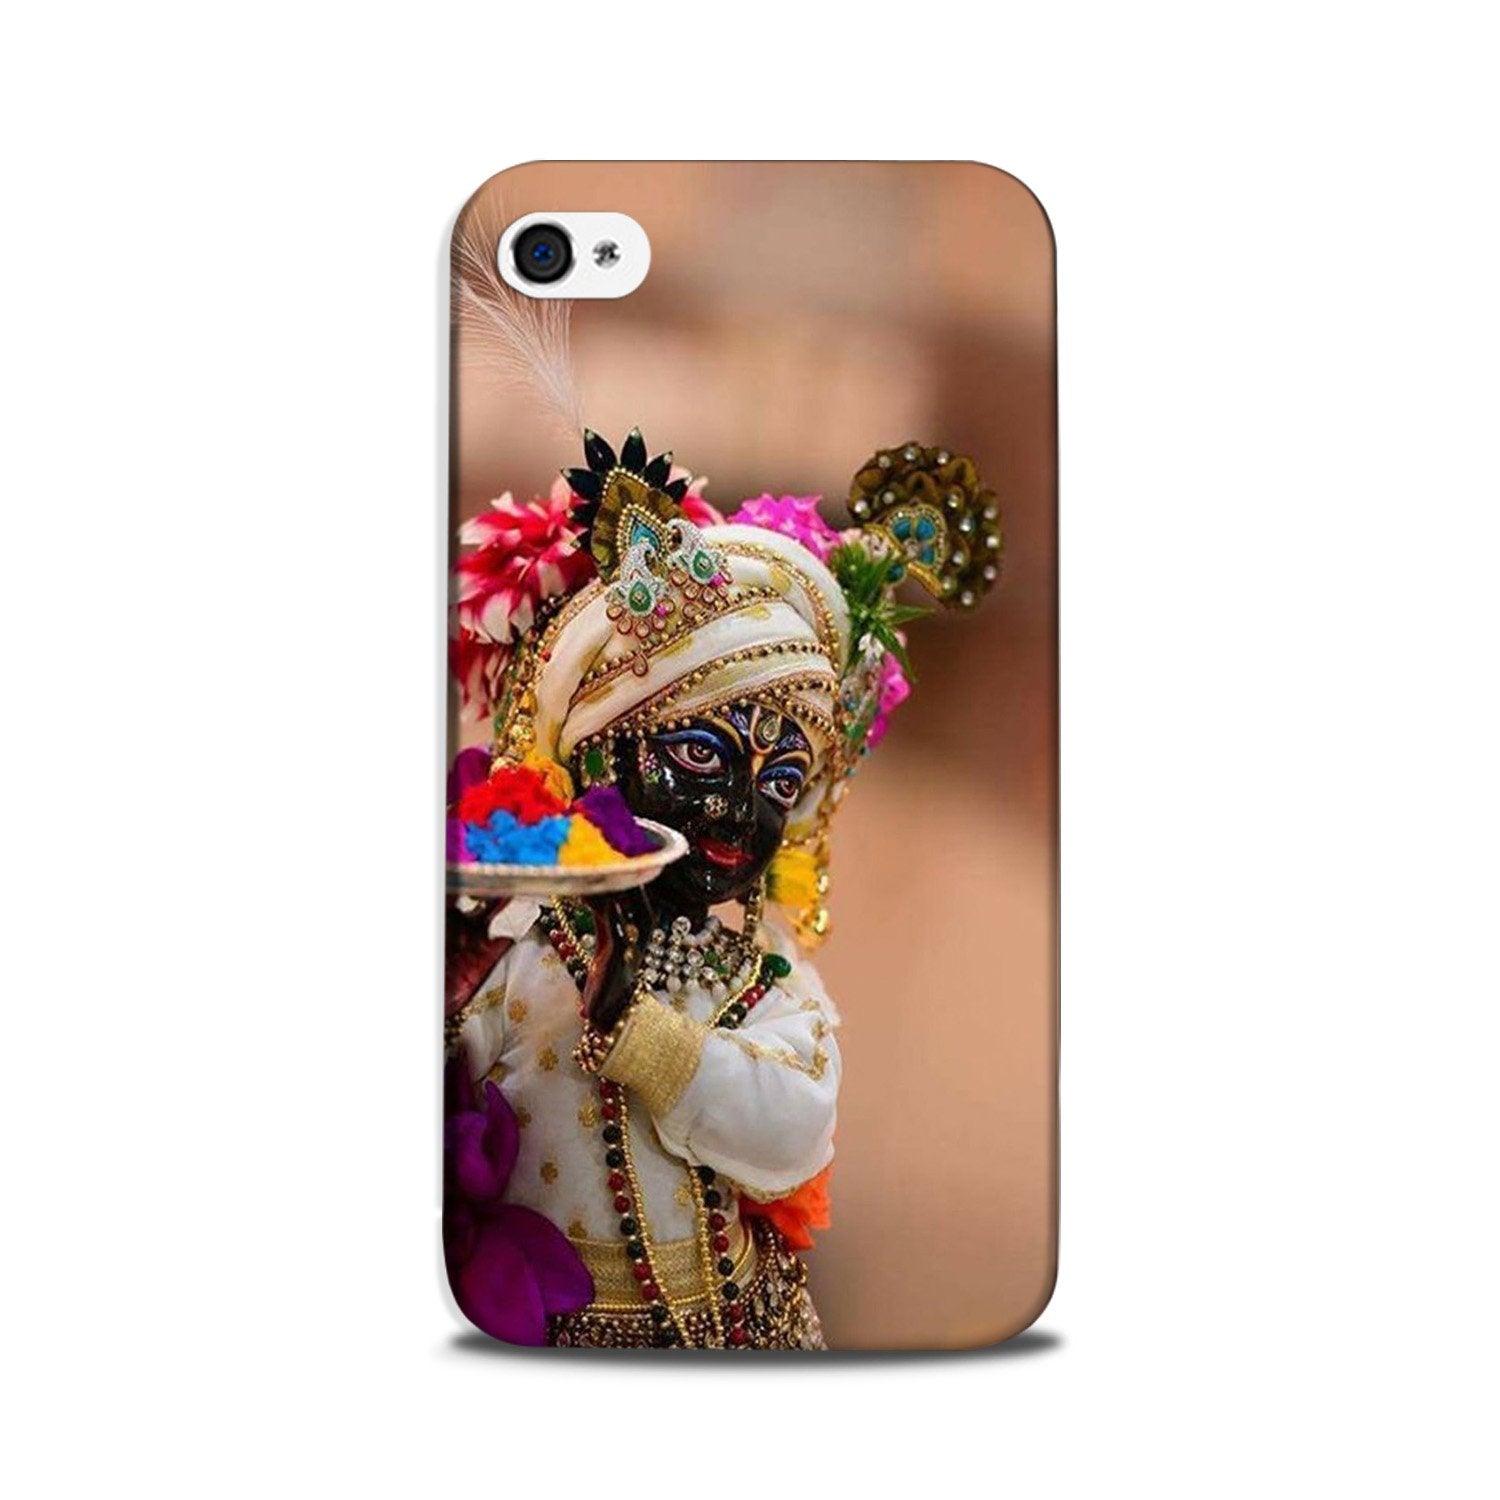 Lord Krishna2 Case for iPhone 5/ 5s